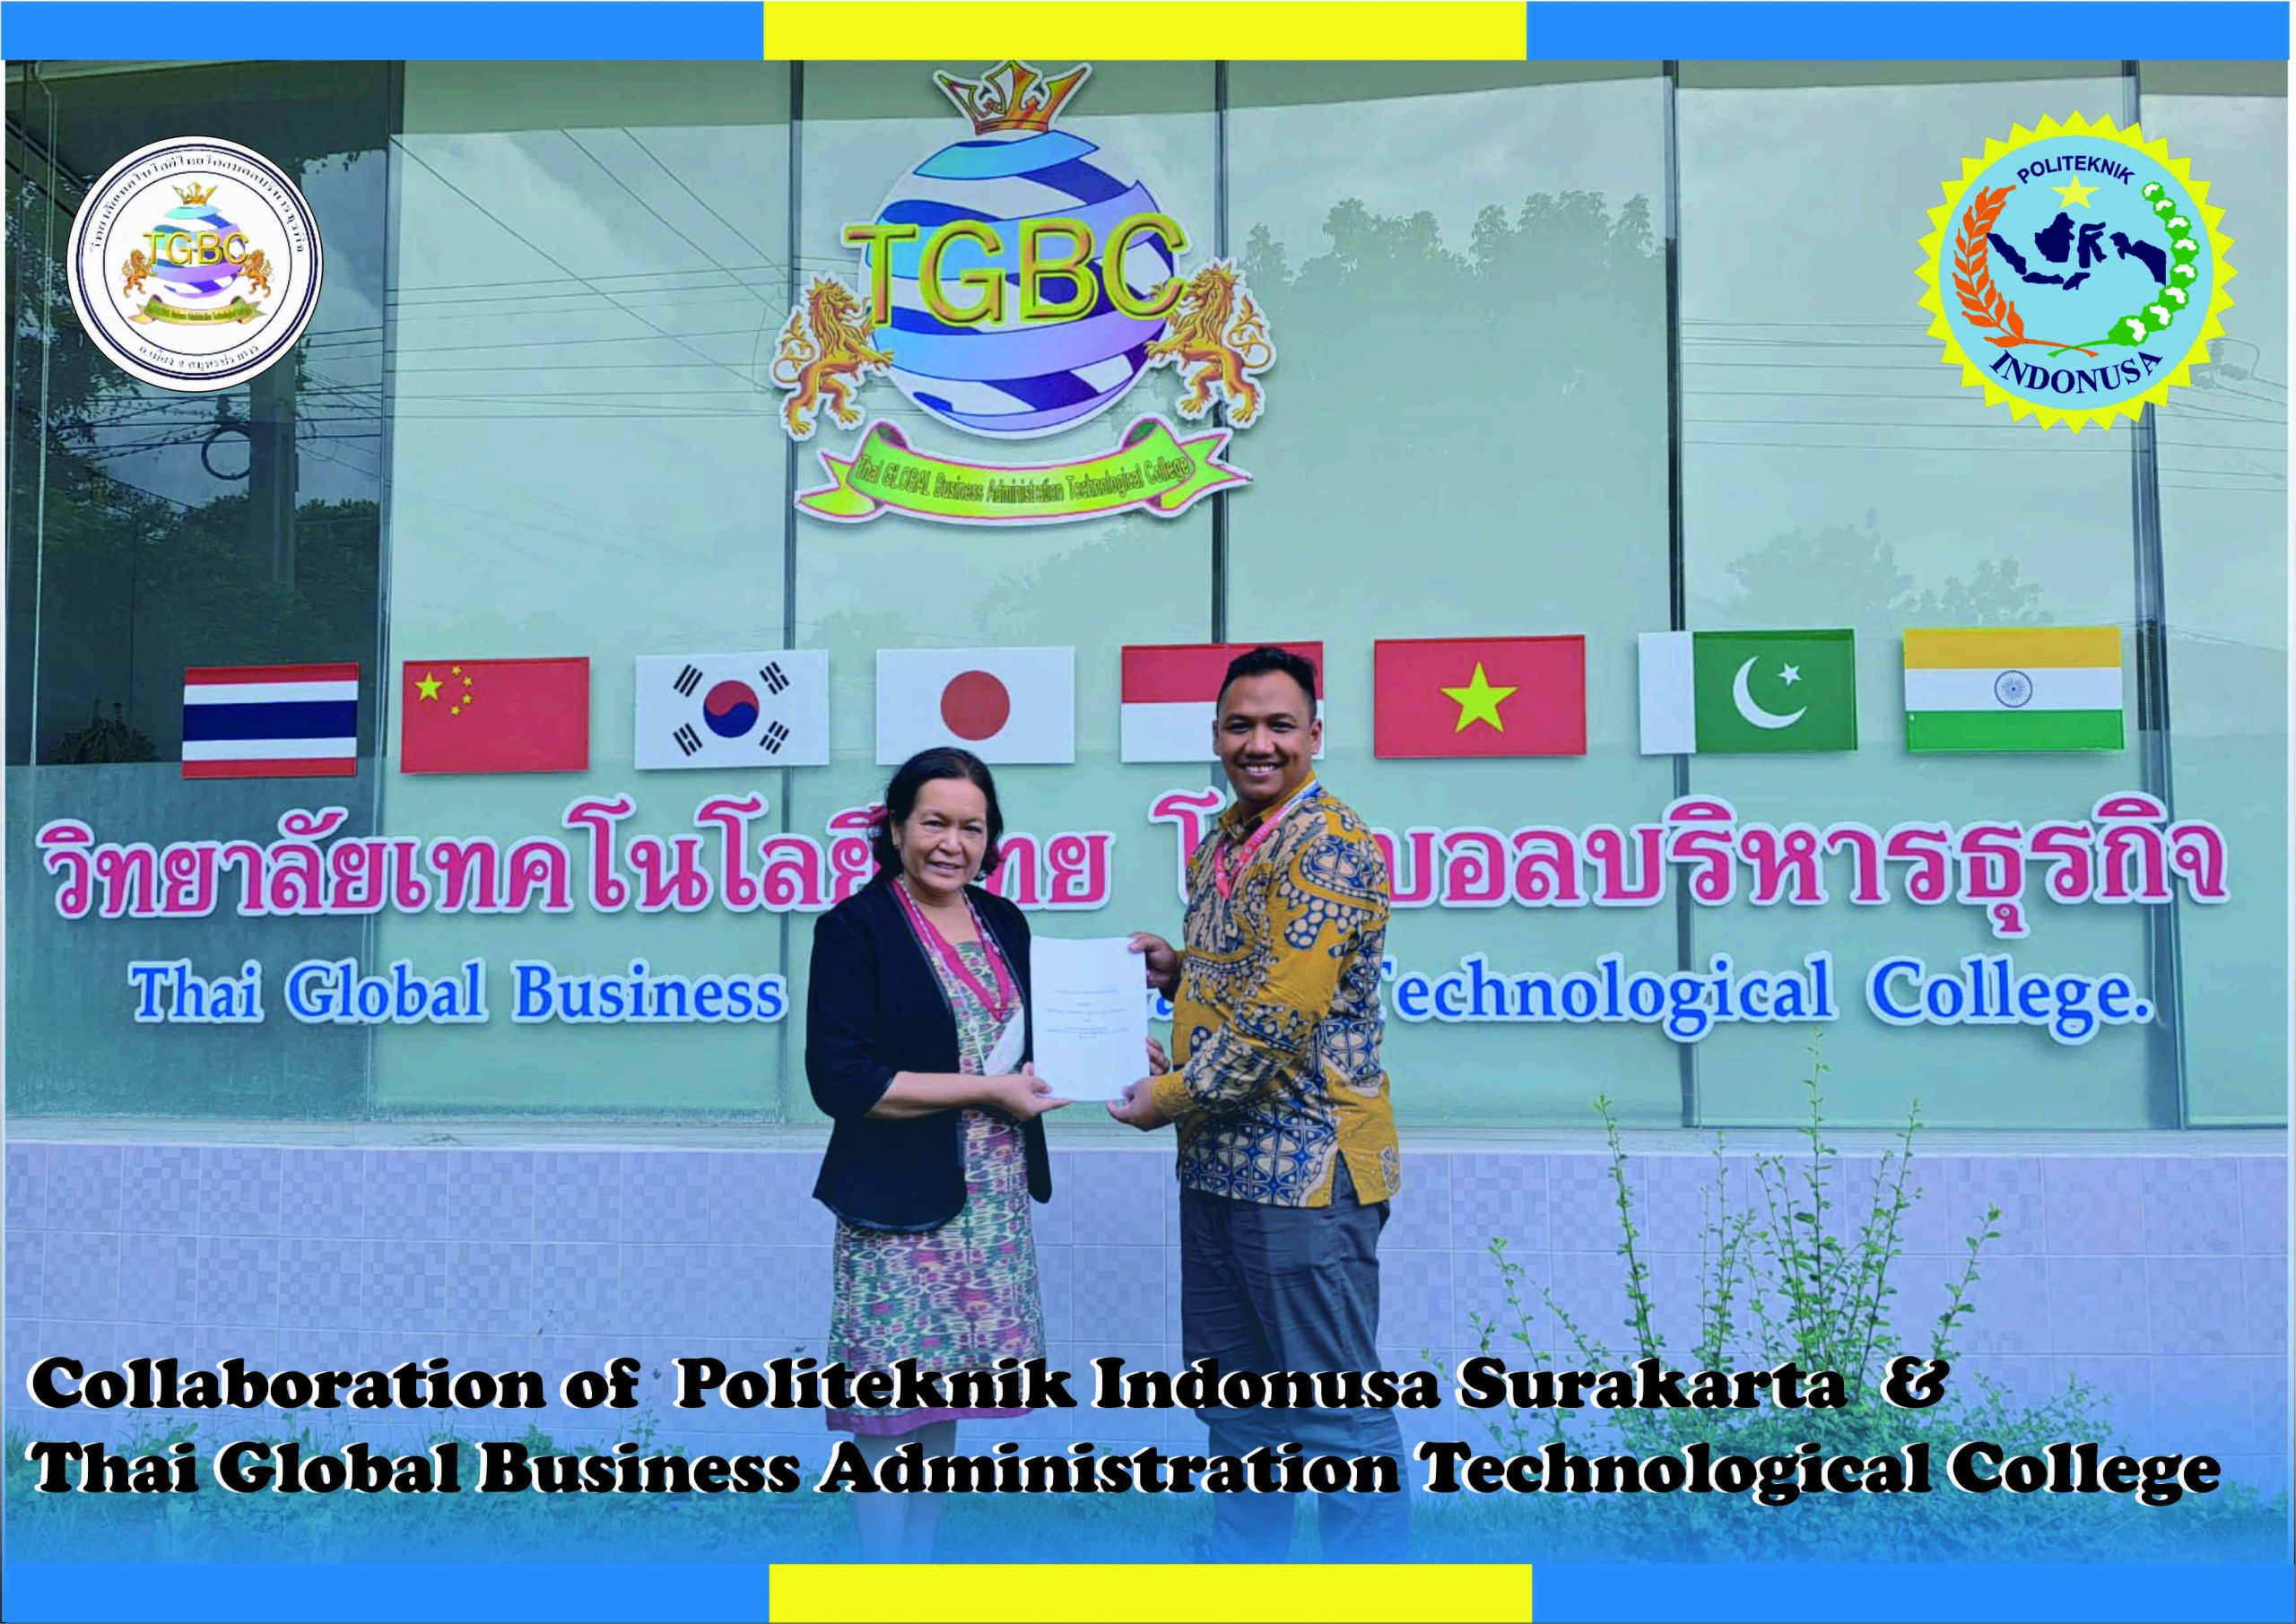 Polytechnic Indonusa Surakarta Establishes the Implementation of Visit Campus Cooperation and Planning of Community Service Activities with Thai Global Business Administration Technological College